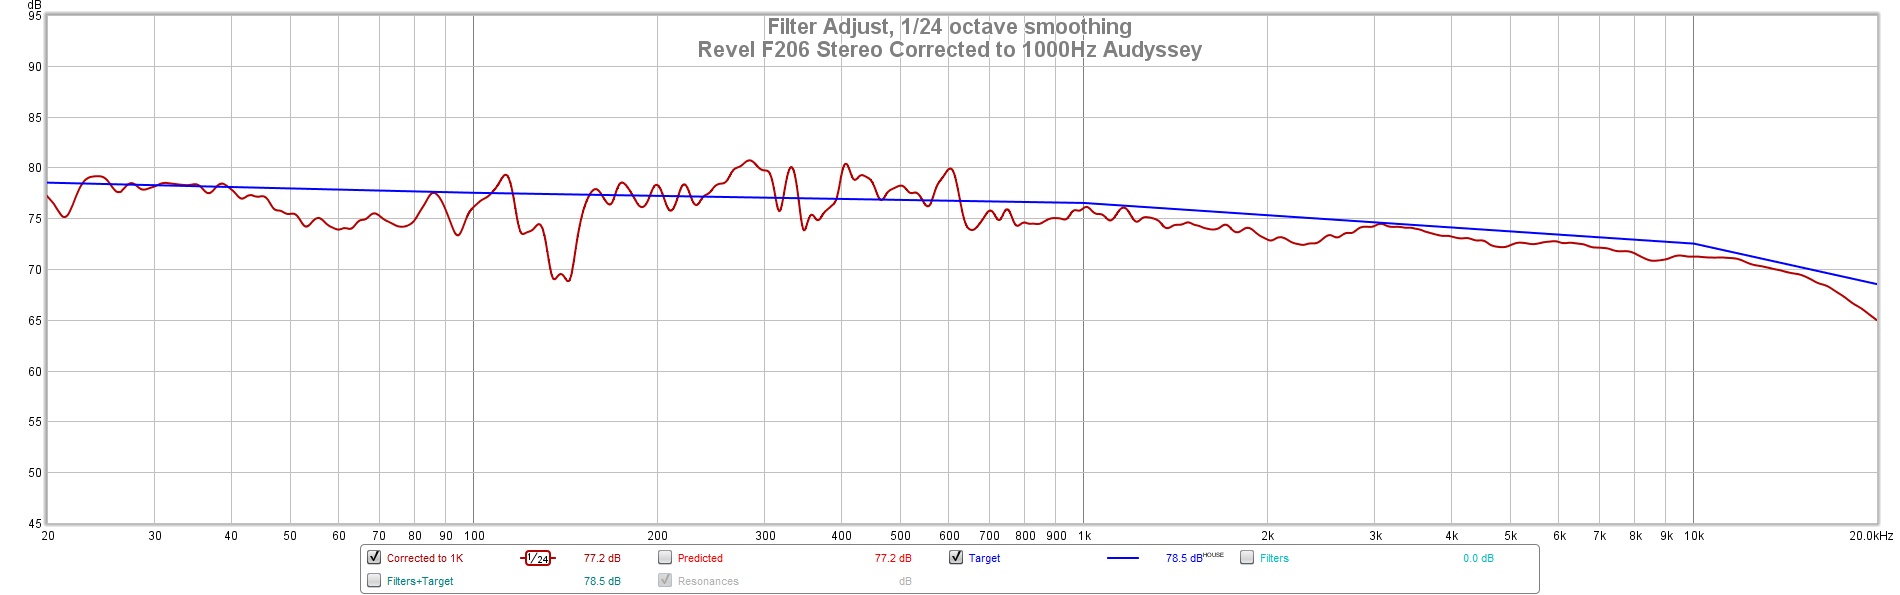 Revel F206 Stereo Corrected to 1000Hz Audyssey.png